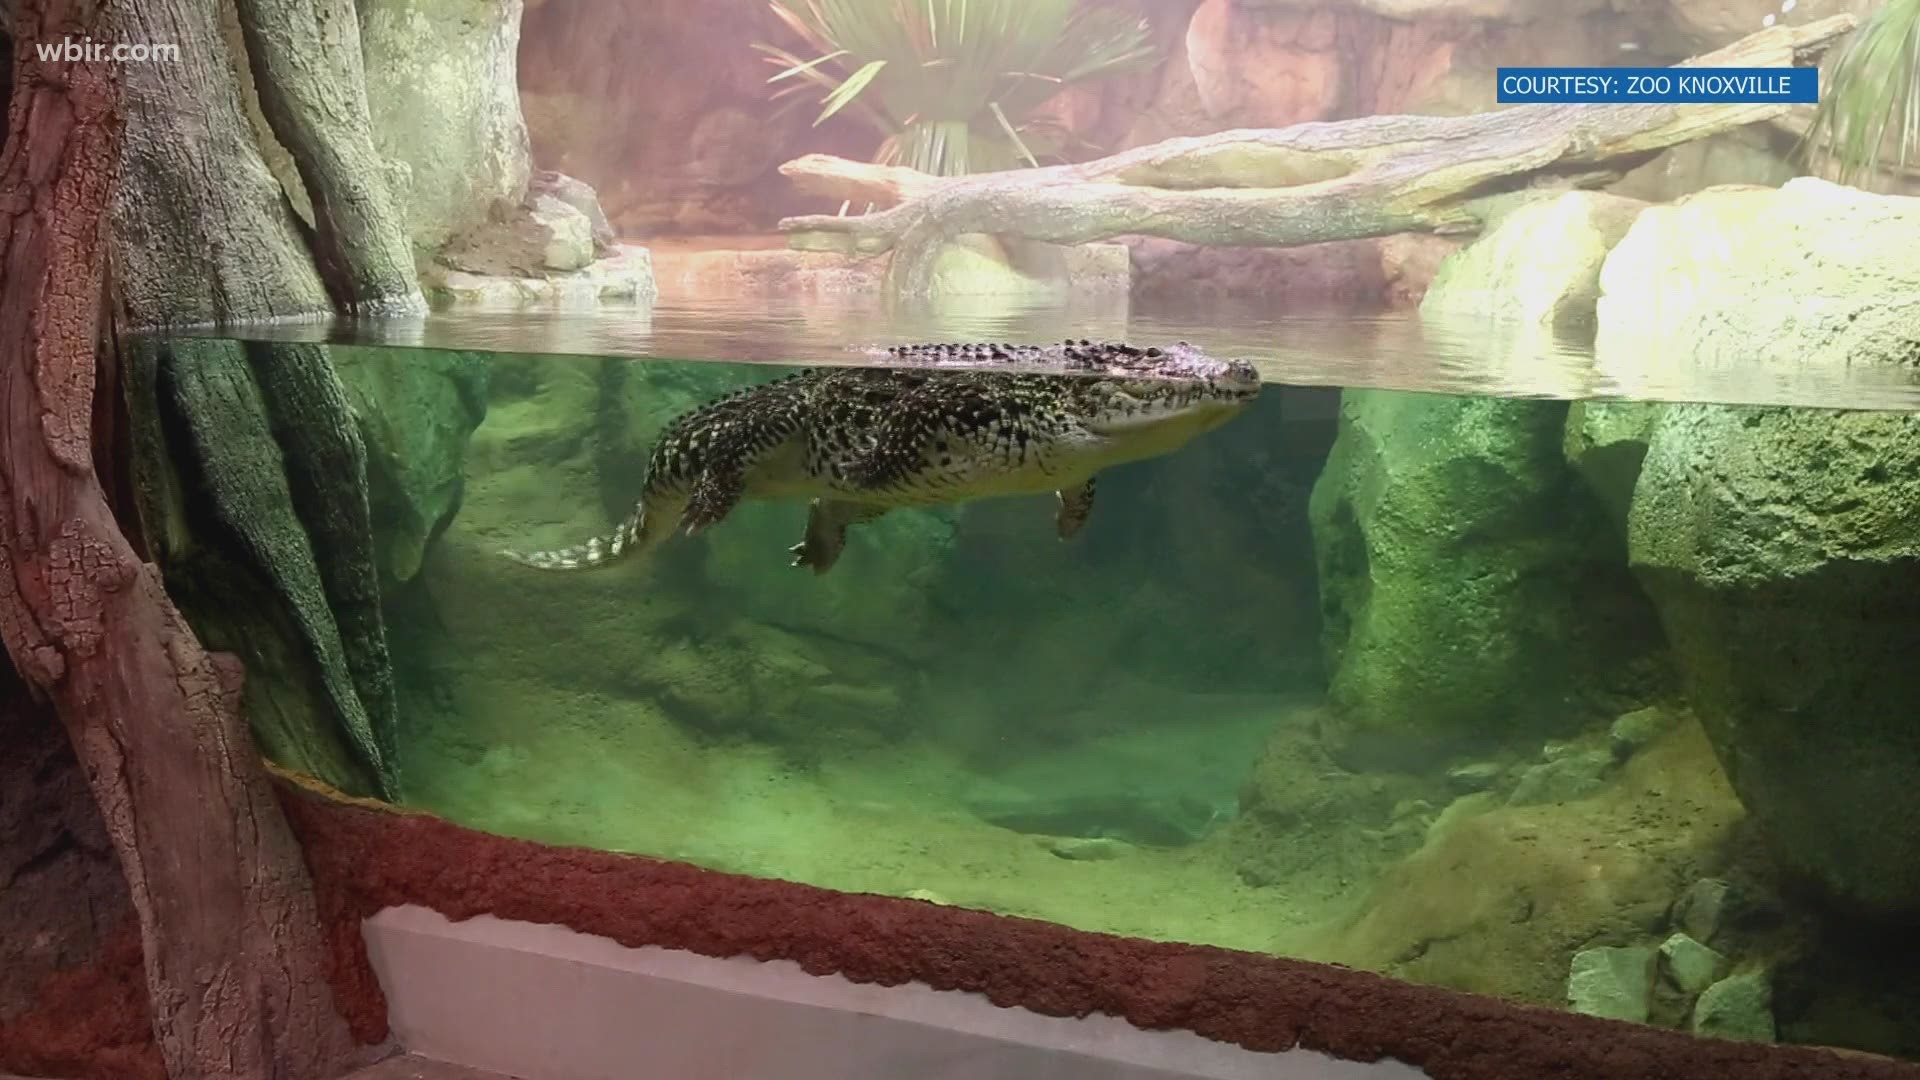 Cuban crocodiles are considered endangered. Zoo Knoxville said there are just thousands of them left living in the wild.